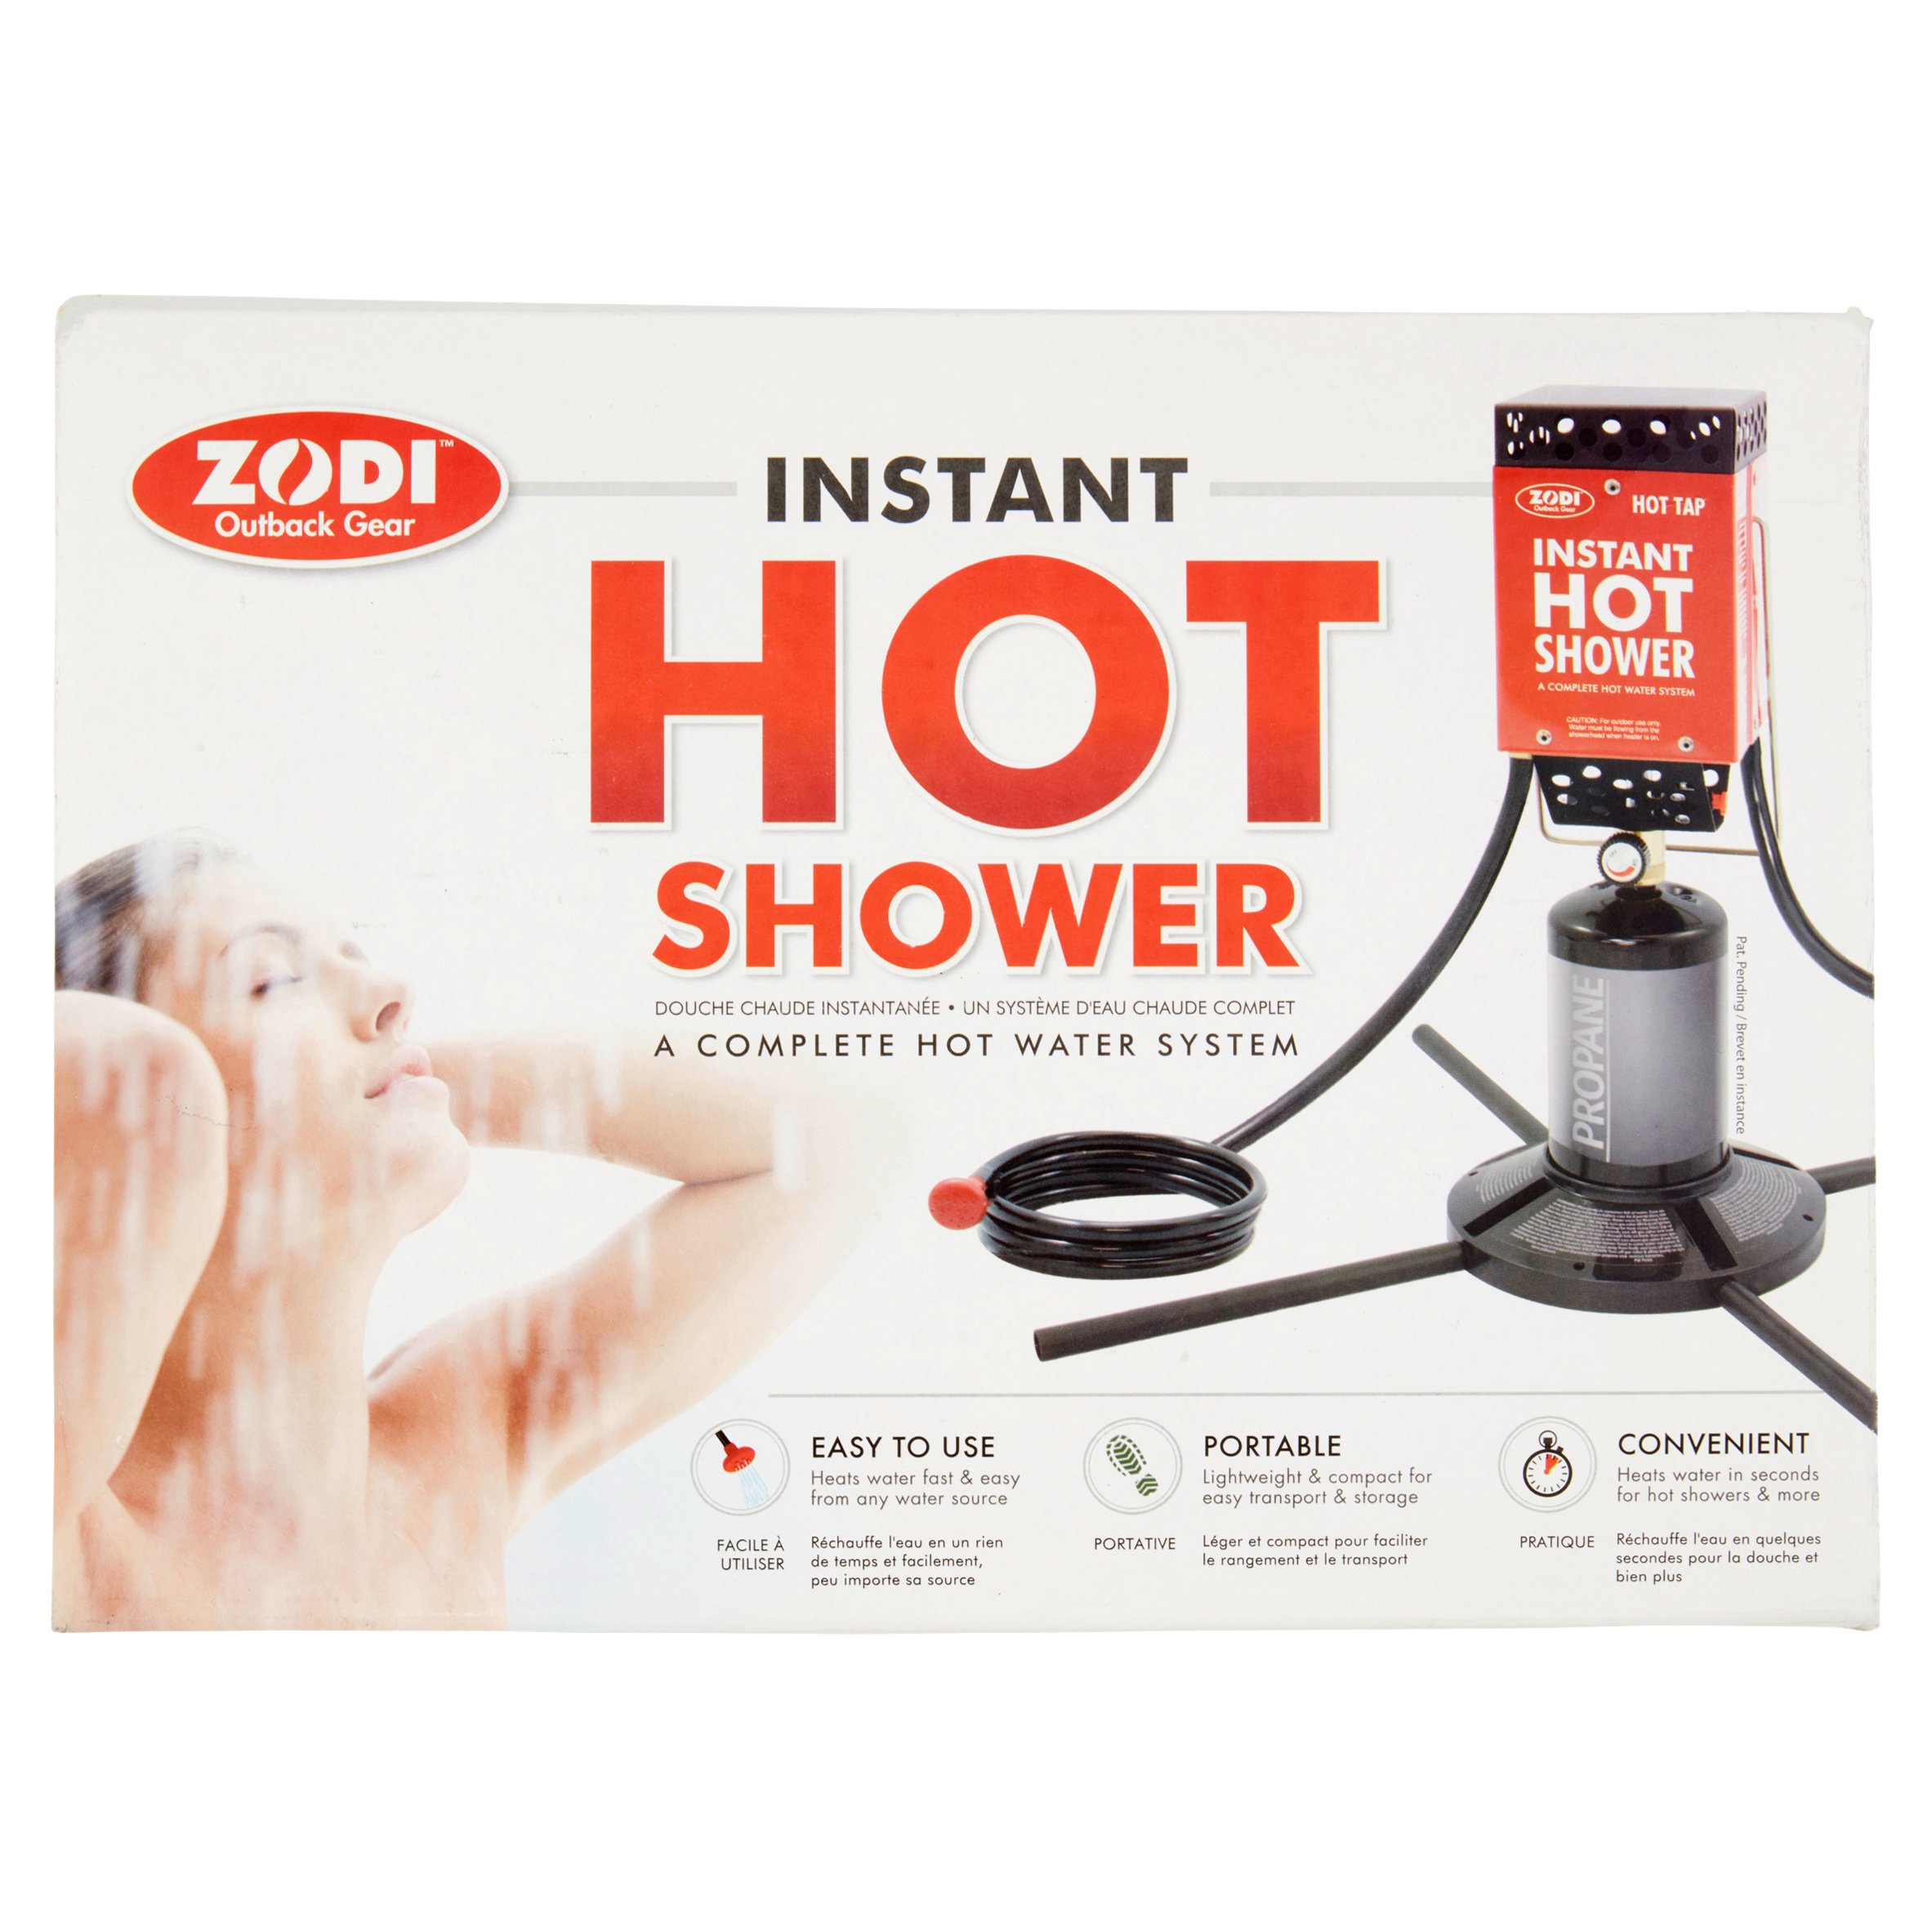 Zodi Outback Gear Instant Hot Shower - image 4 of 5